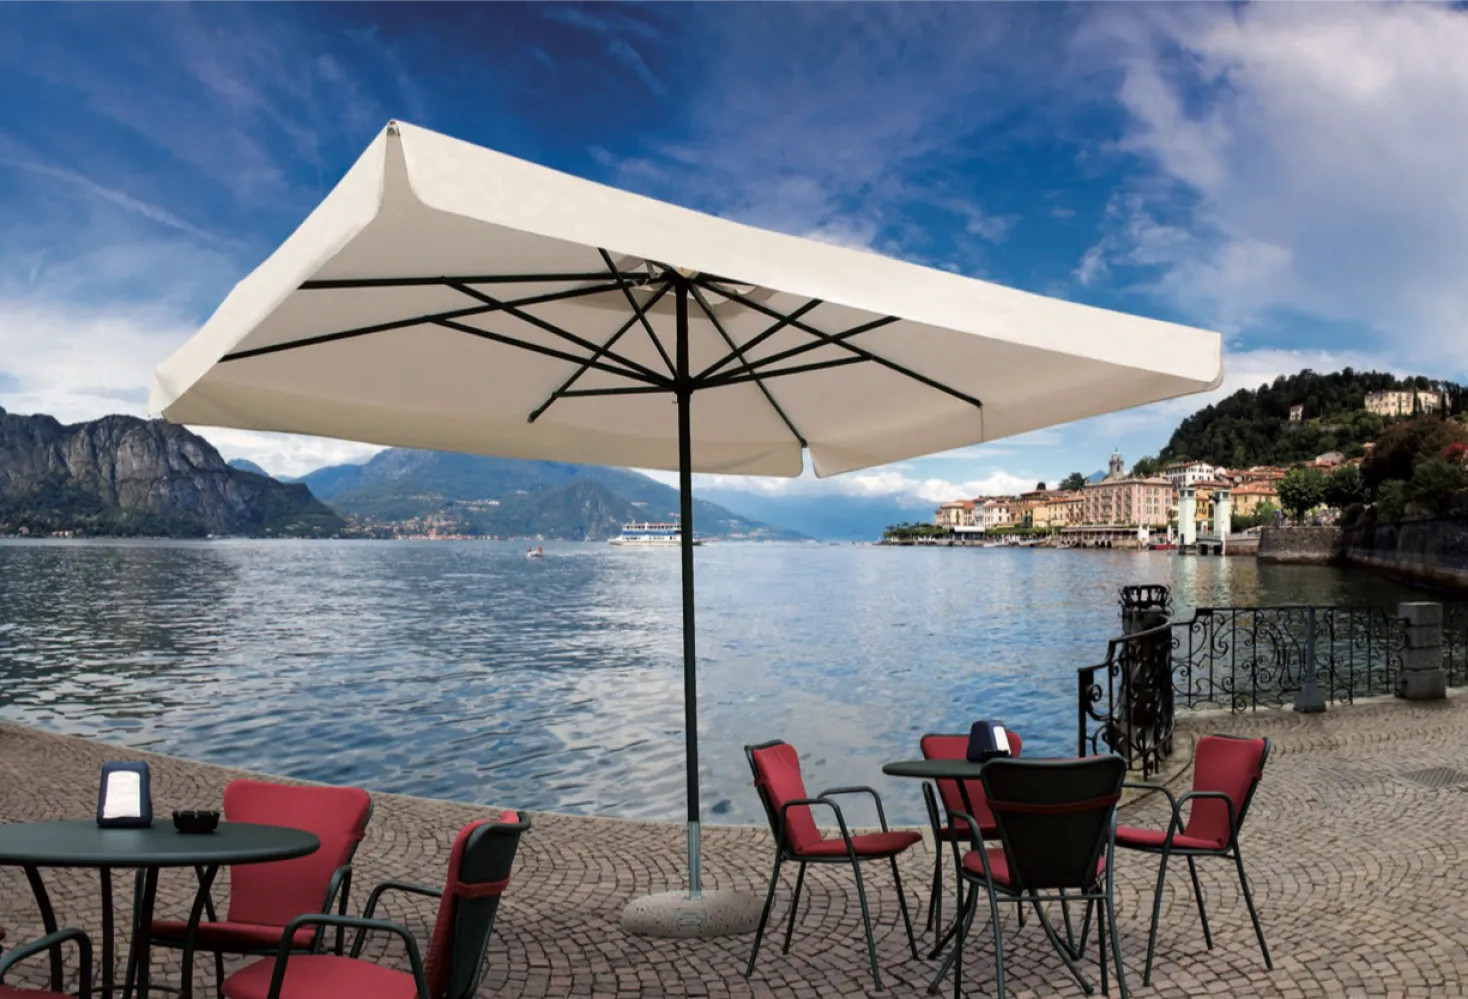 WDPX|scolaro-sonnenschirm-am-comersee-napoli-standard.png